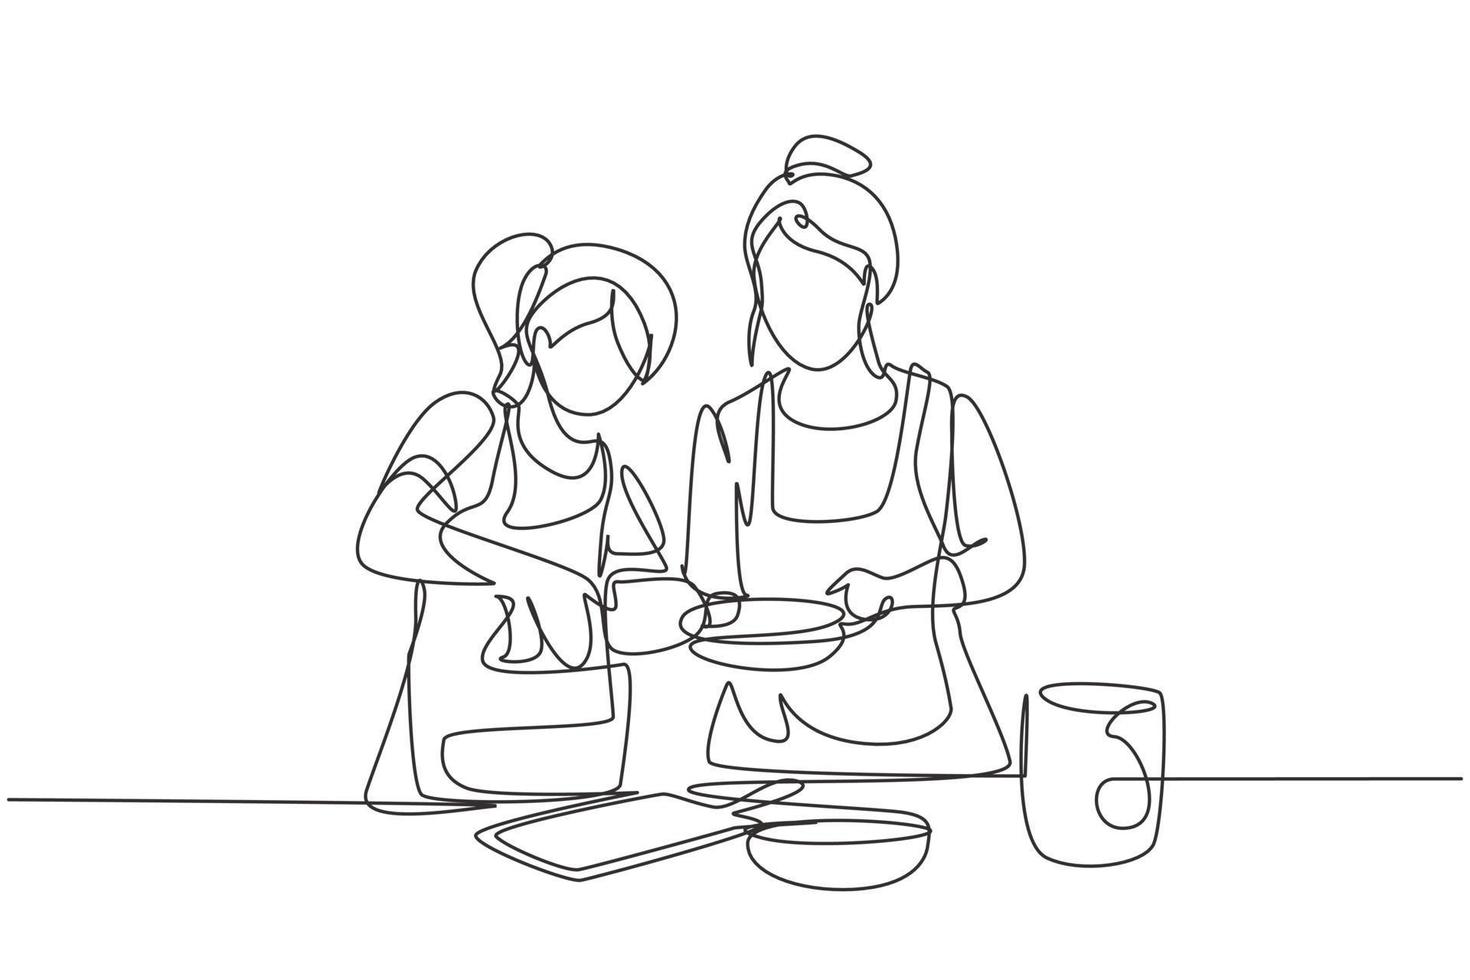 Single one line drawing mother and daughter pour oil into pan which is being held by one of them. Cooking preparation in cozy kitchen at home. Continuous line draw design graphic vector illustration